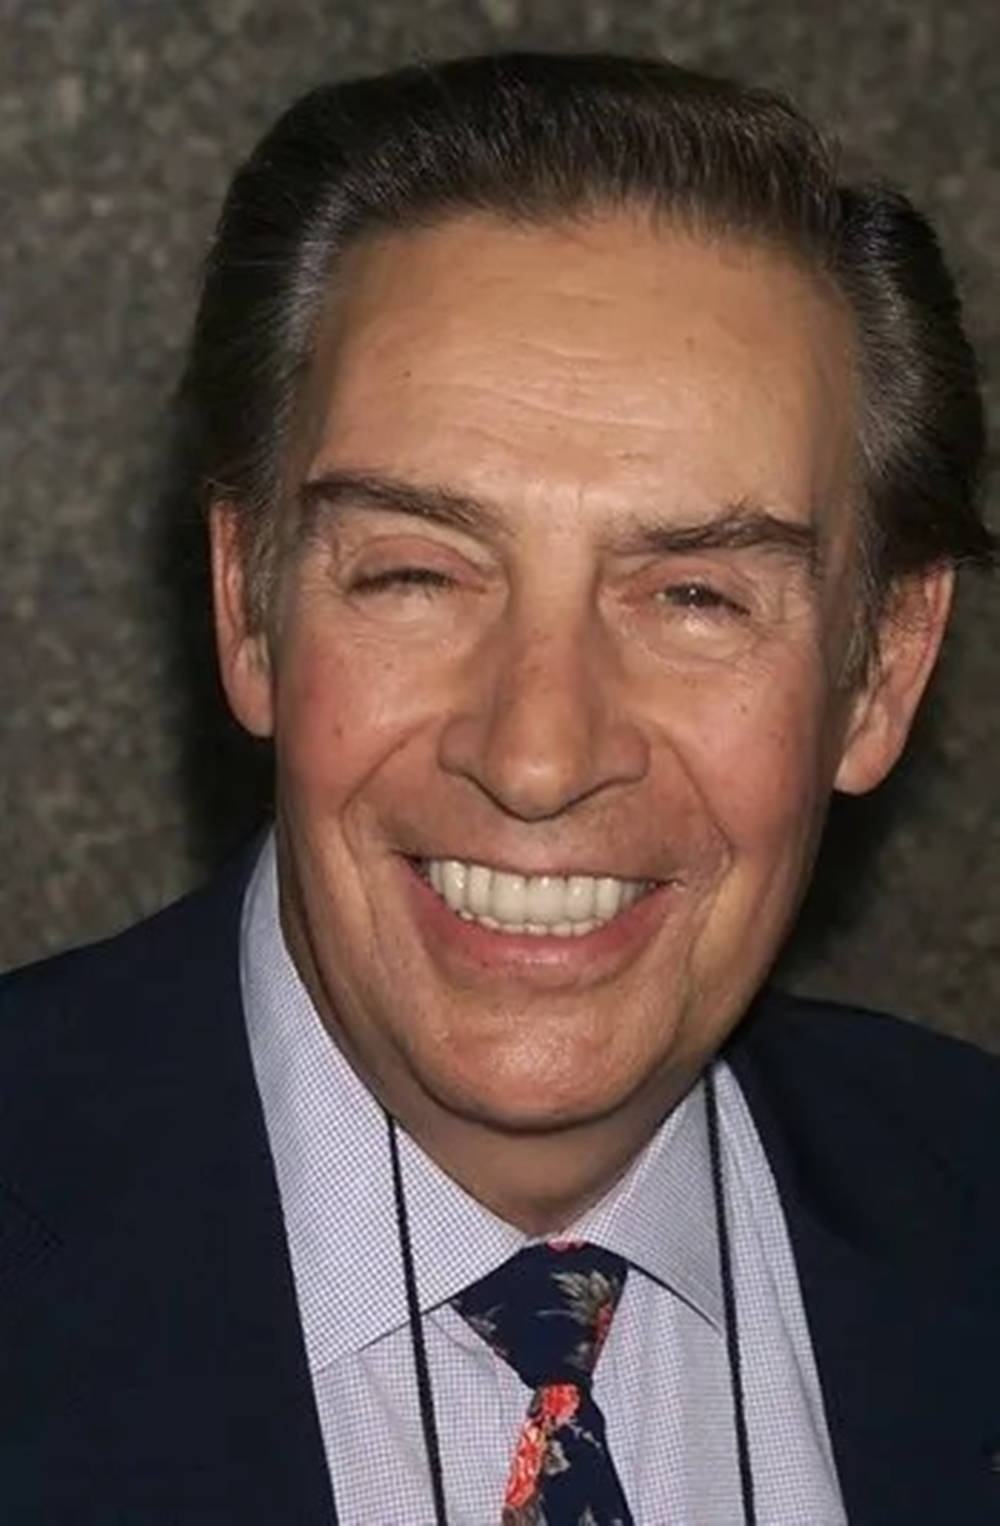 Actor Jerry Orbach At NBC Upfront Wallpaper